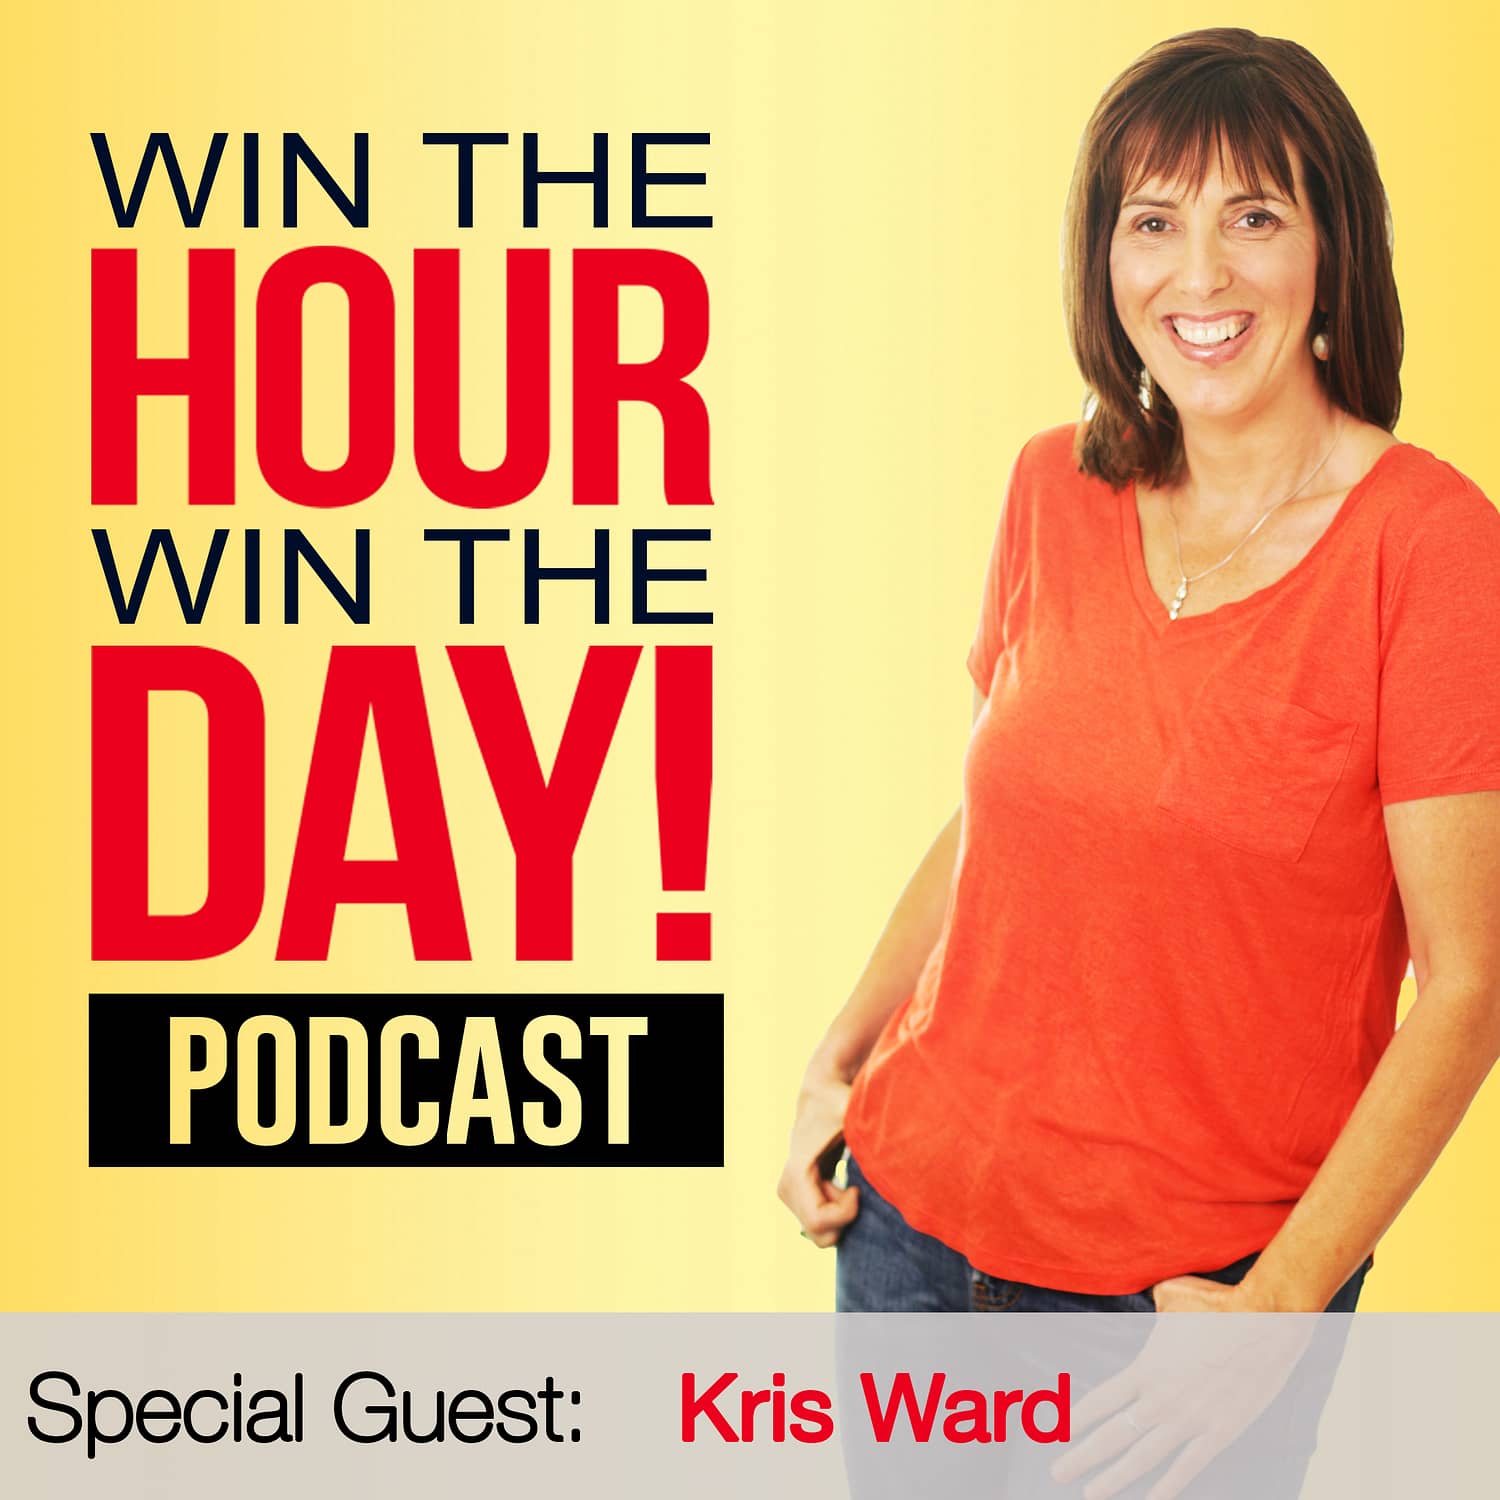 3 Ways To Crawl Out Of The Grind! with Kris Ward